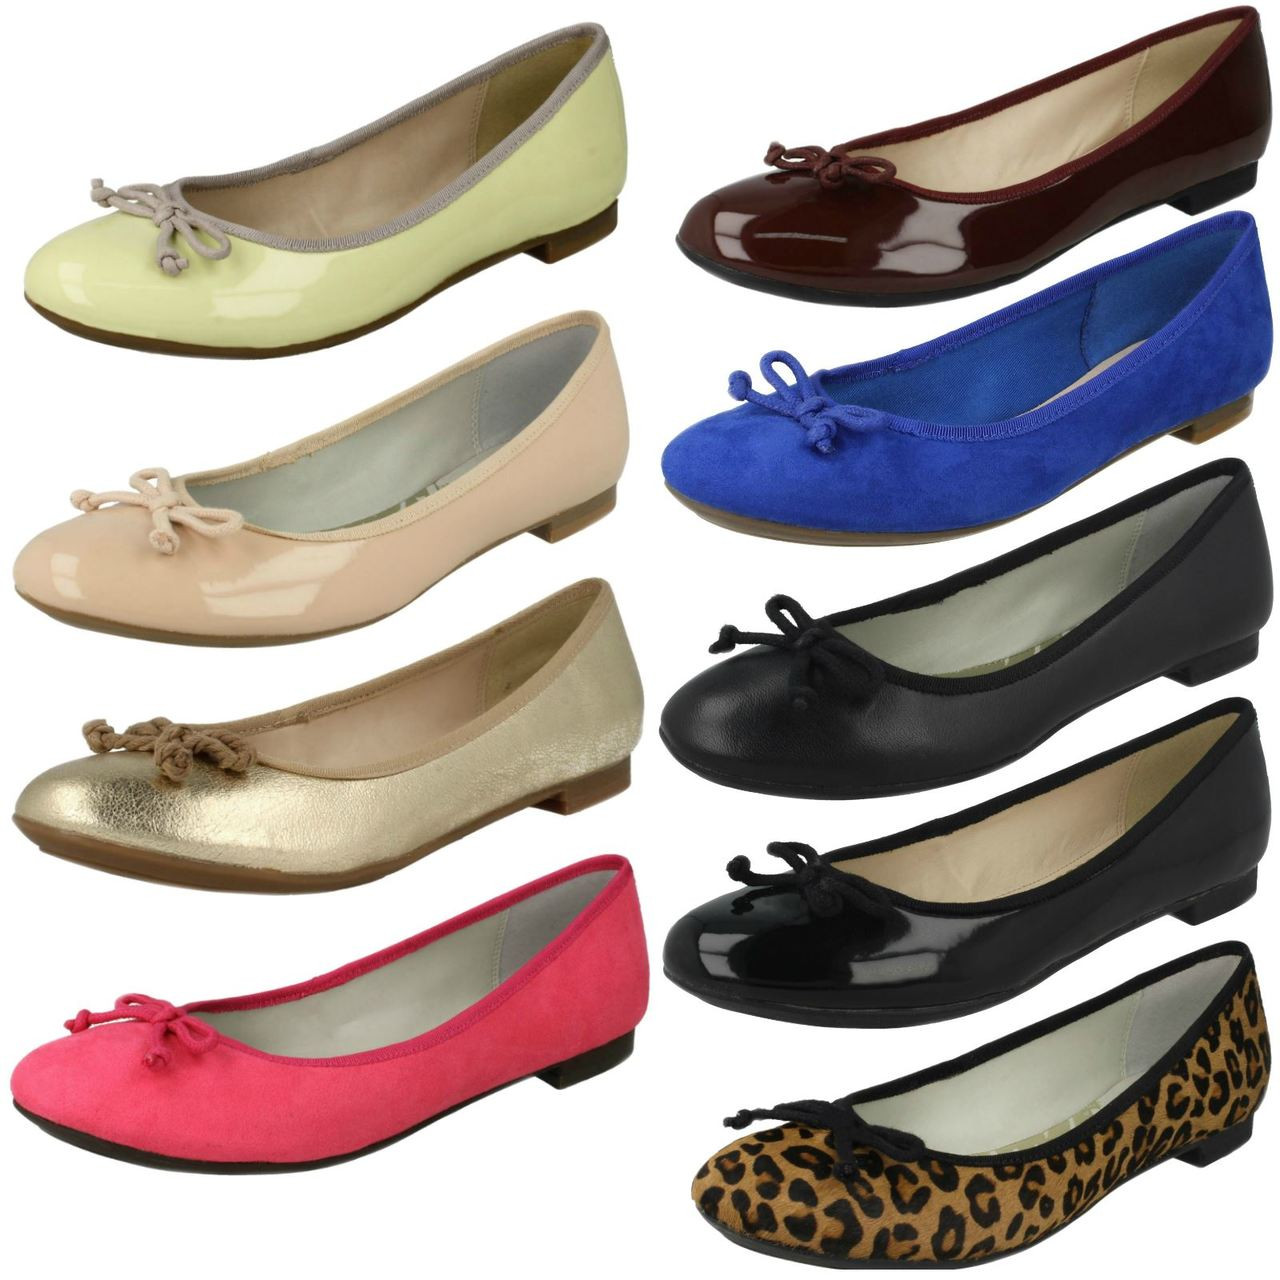 ladies flat shoes at clarks